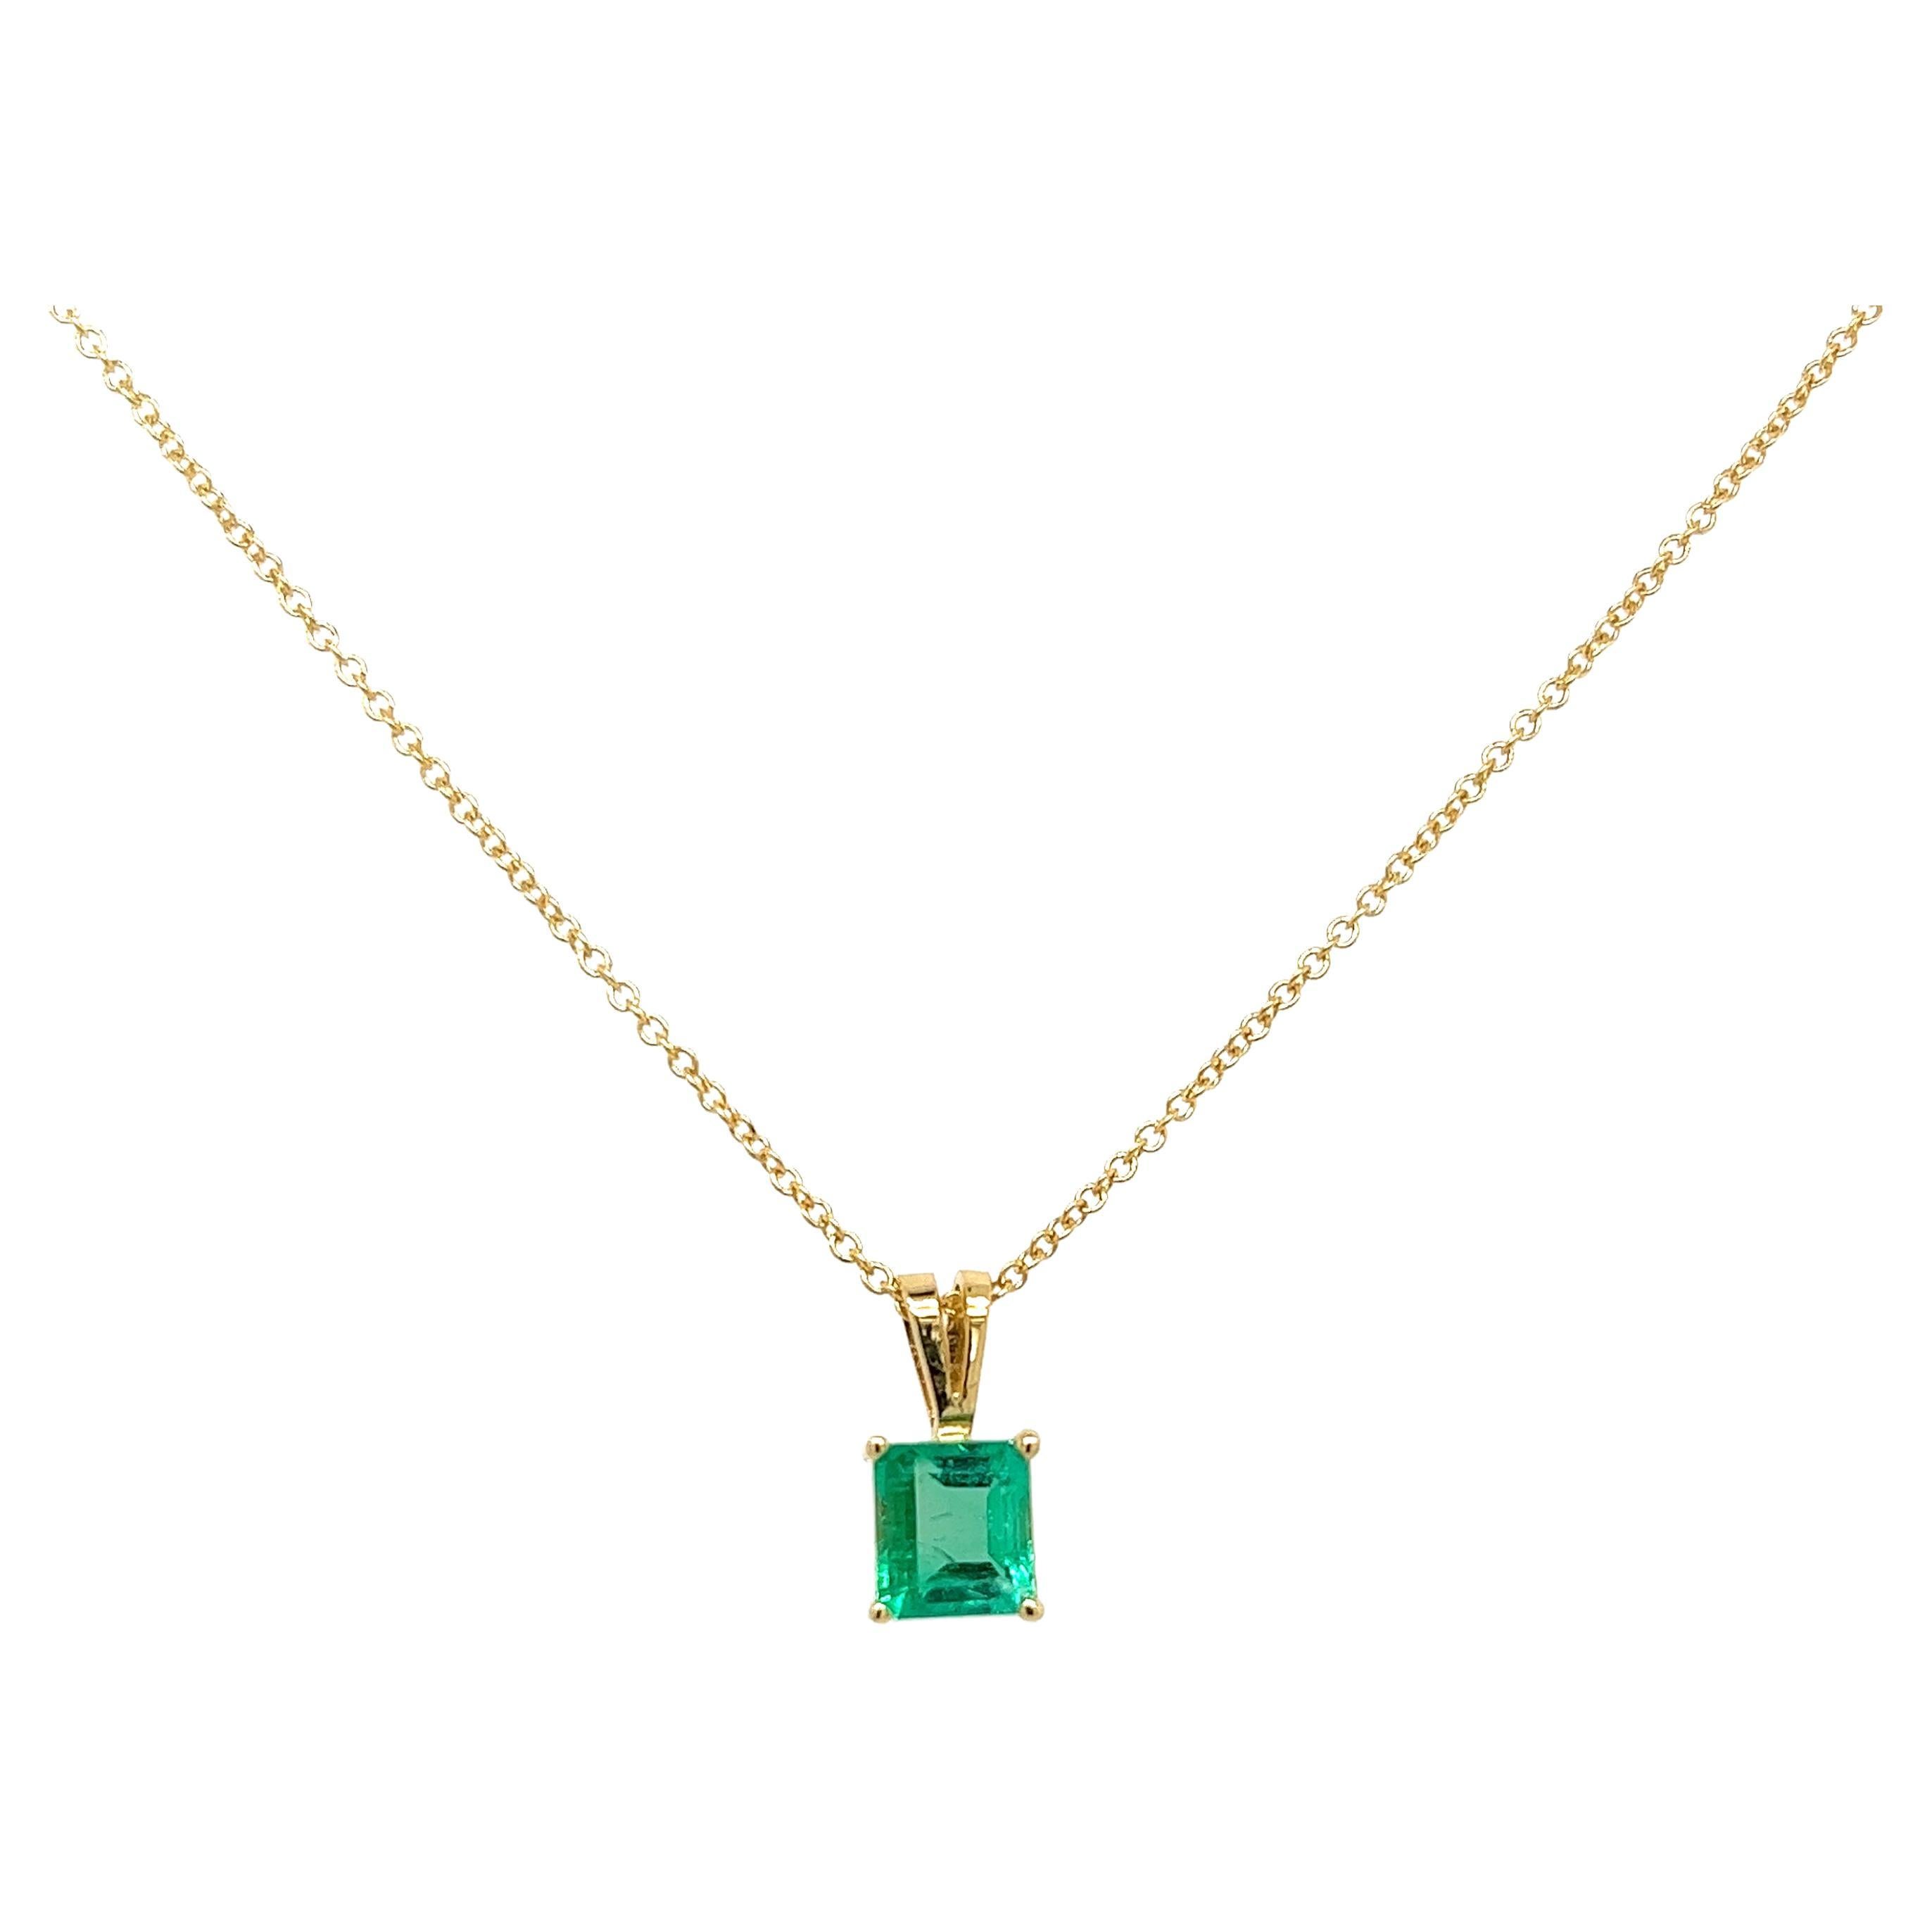 1.20 Carat Colombian Emerald Solitaire Pendant Necklace in 18K Yellow Gold